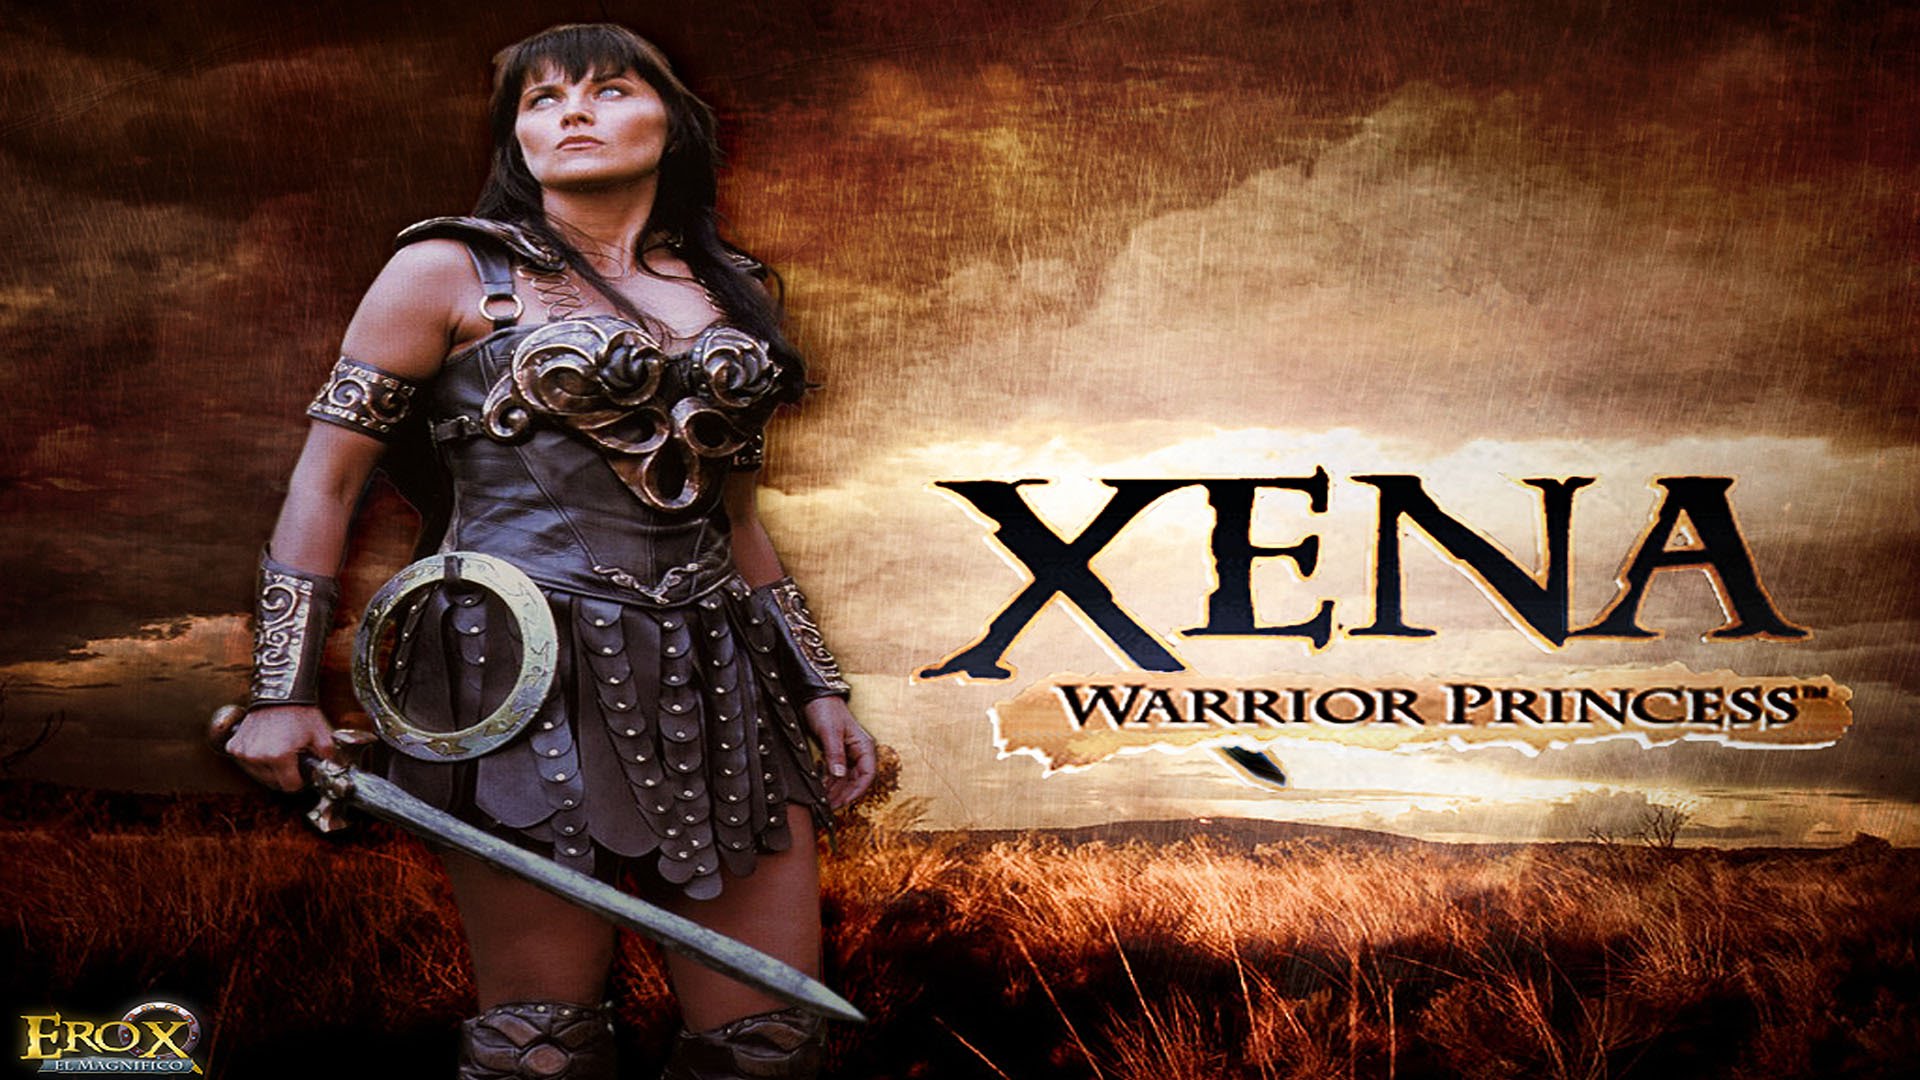 Amazing Xena Pictures & Backgrounds